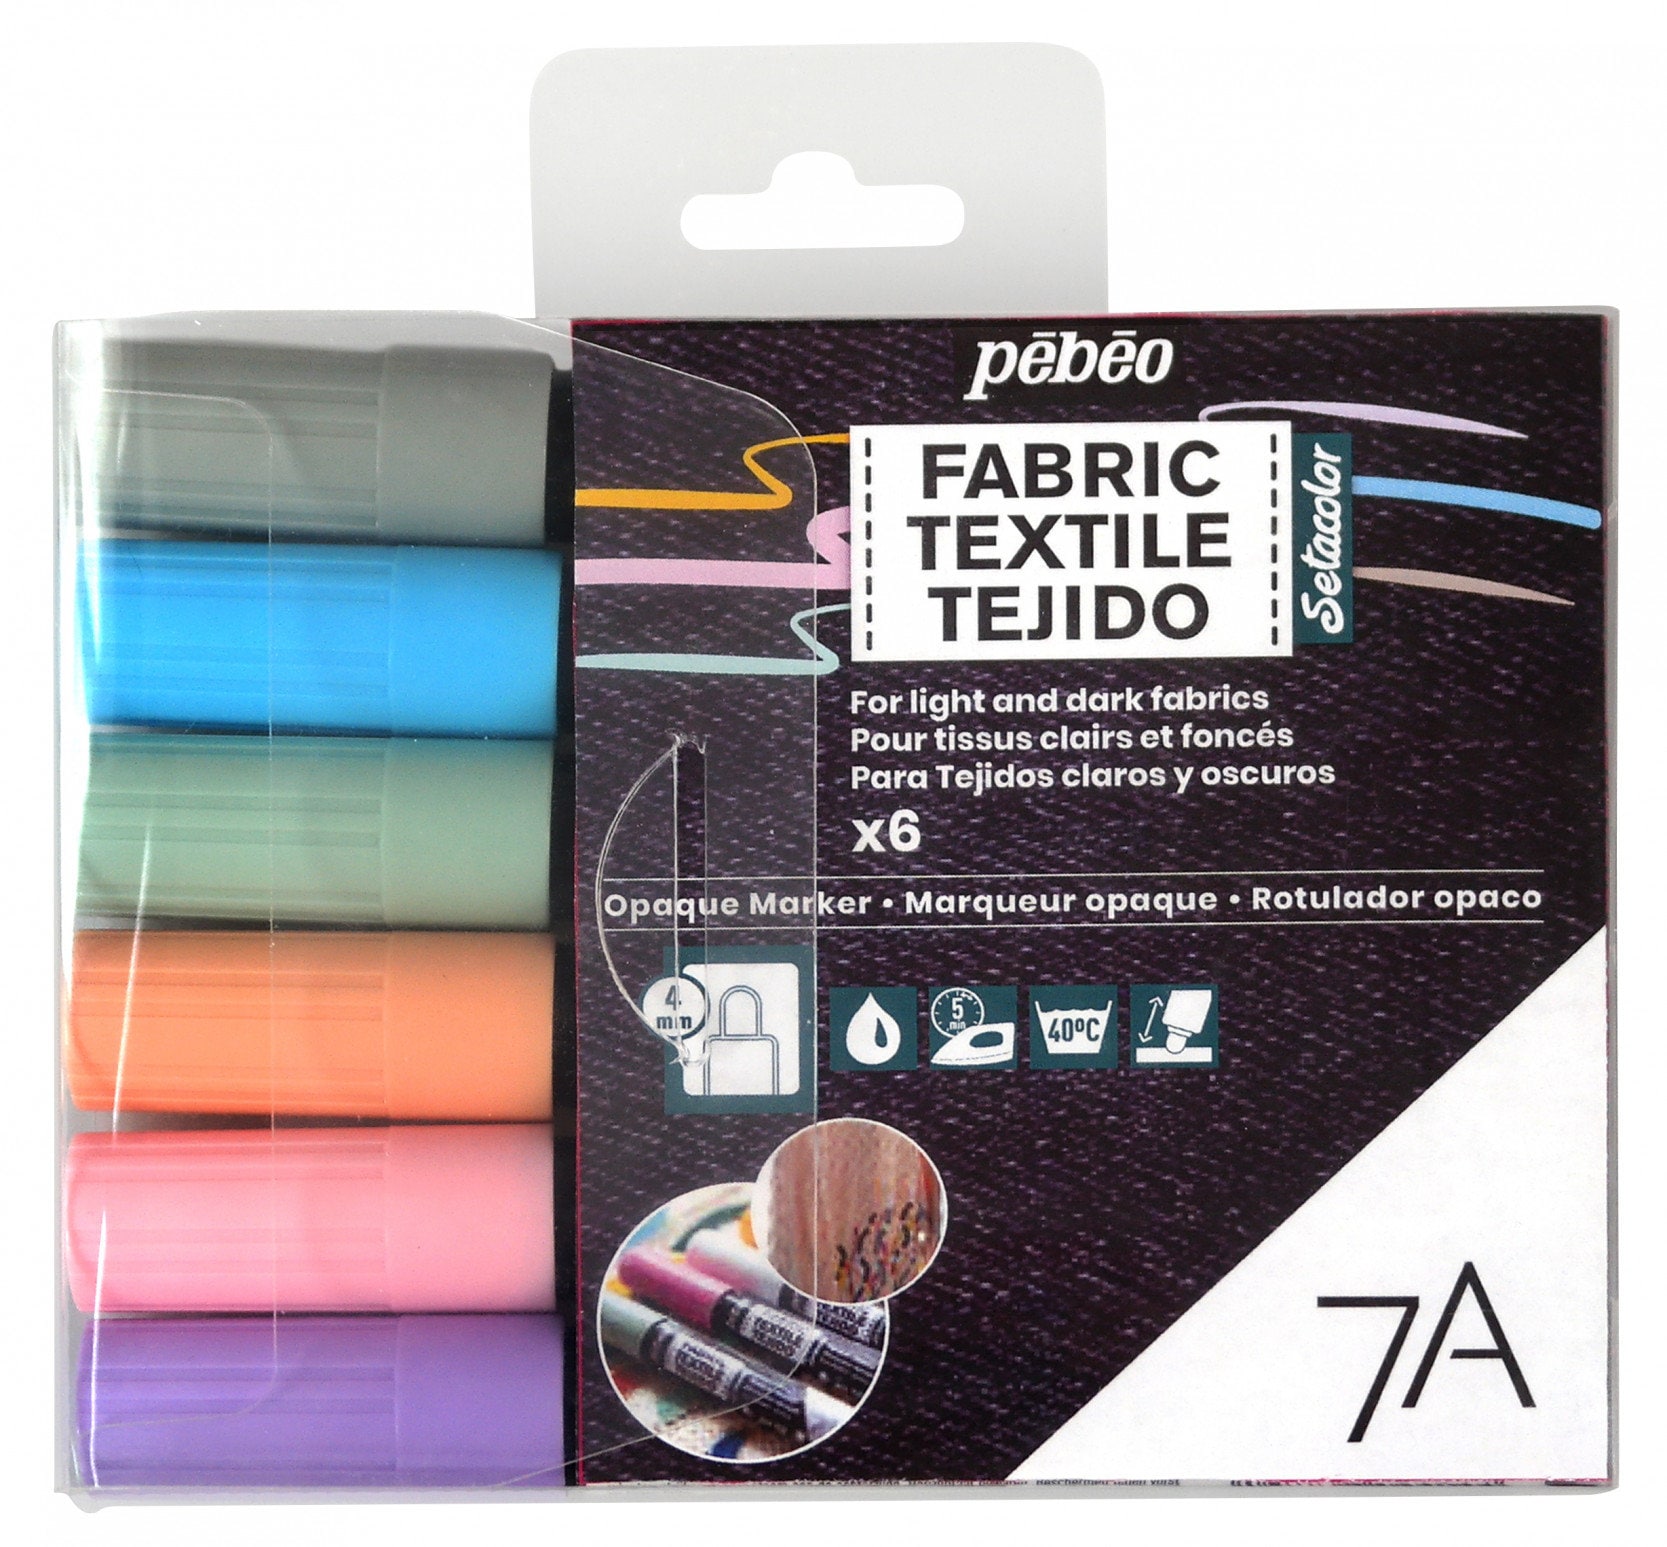 Frixion Pen Fineliner - Erasable fabric pen - rainbow colors - heat  erasable pen for fabric and pattern making - ships next business day!